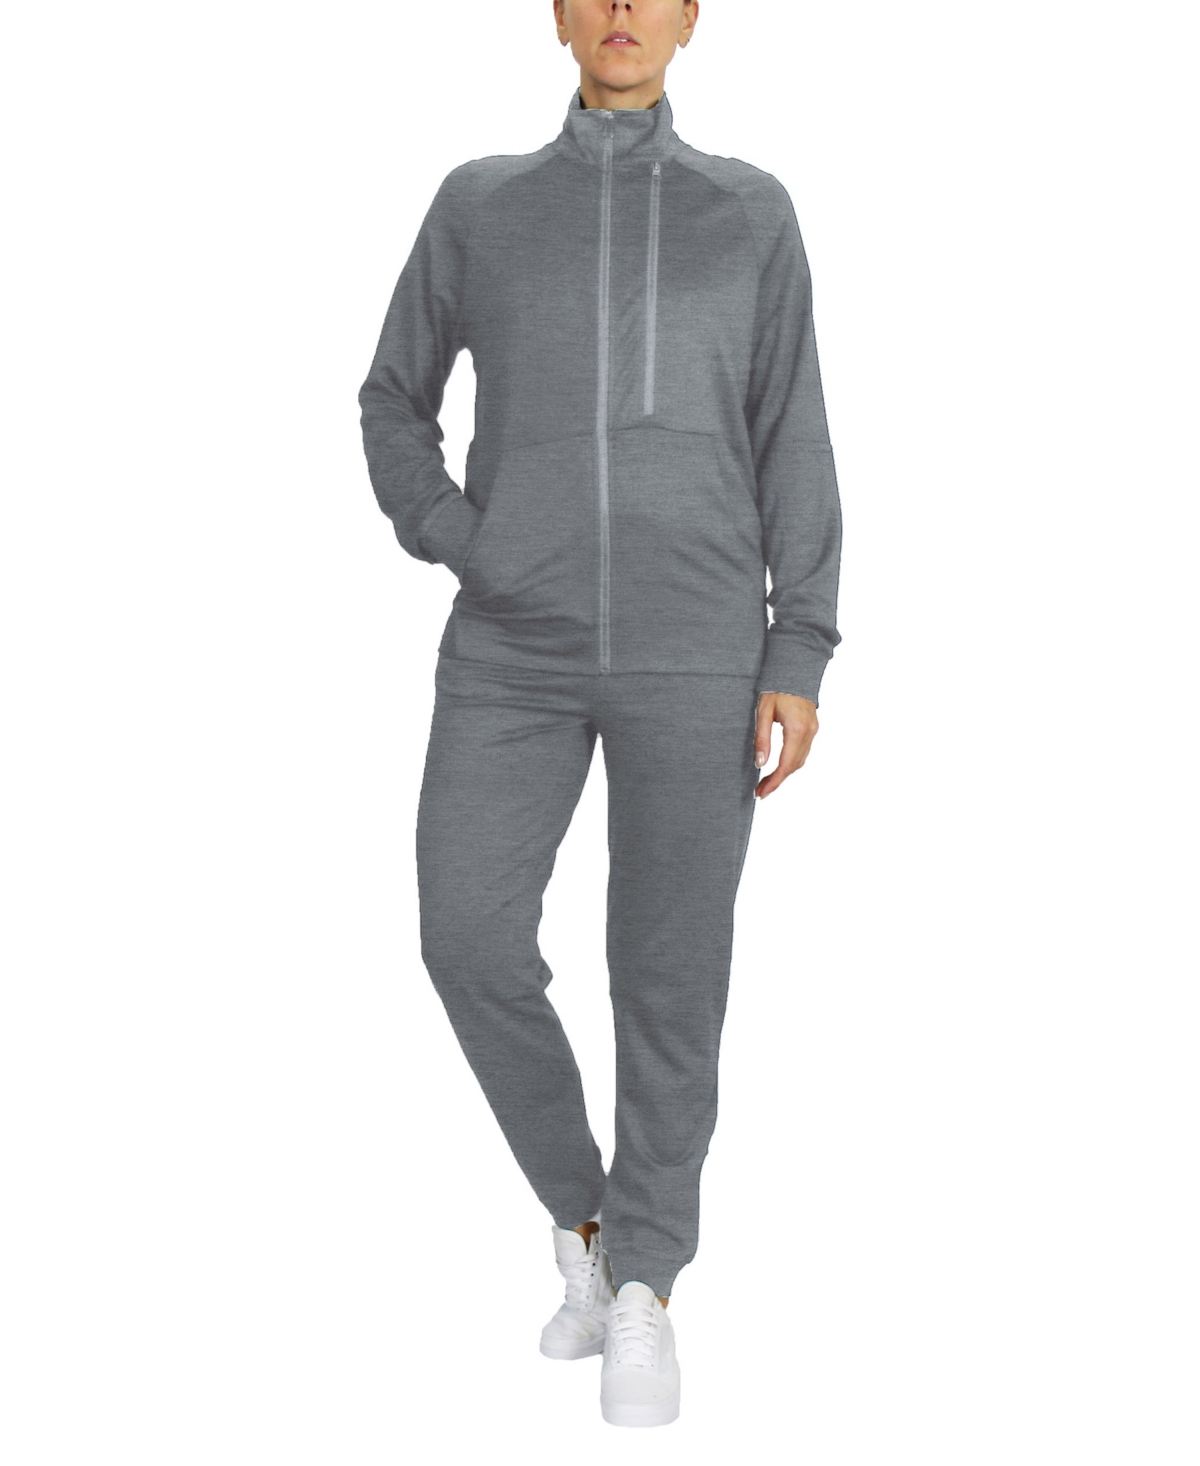 Women's Moisture Wicking Performance Active Track Jacket and Jogger Set, 2-Piece - Navy